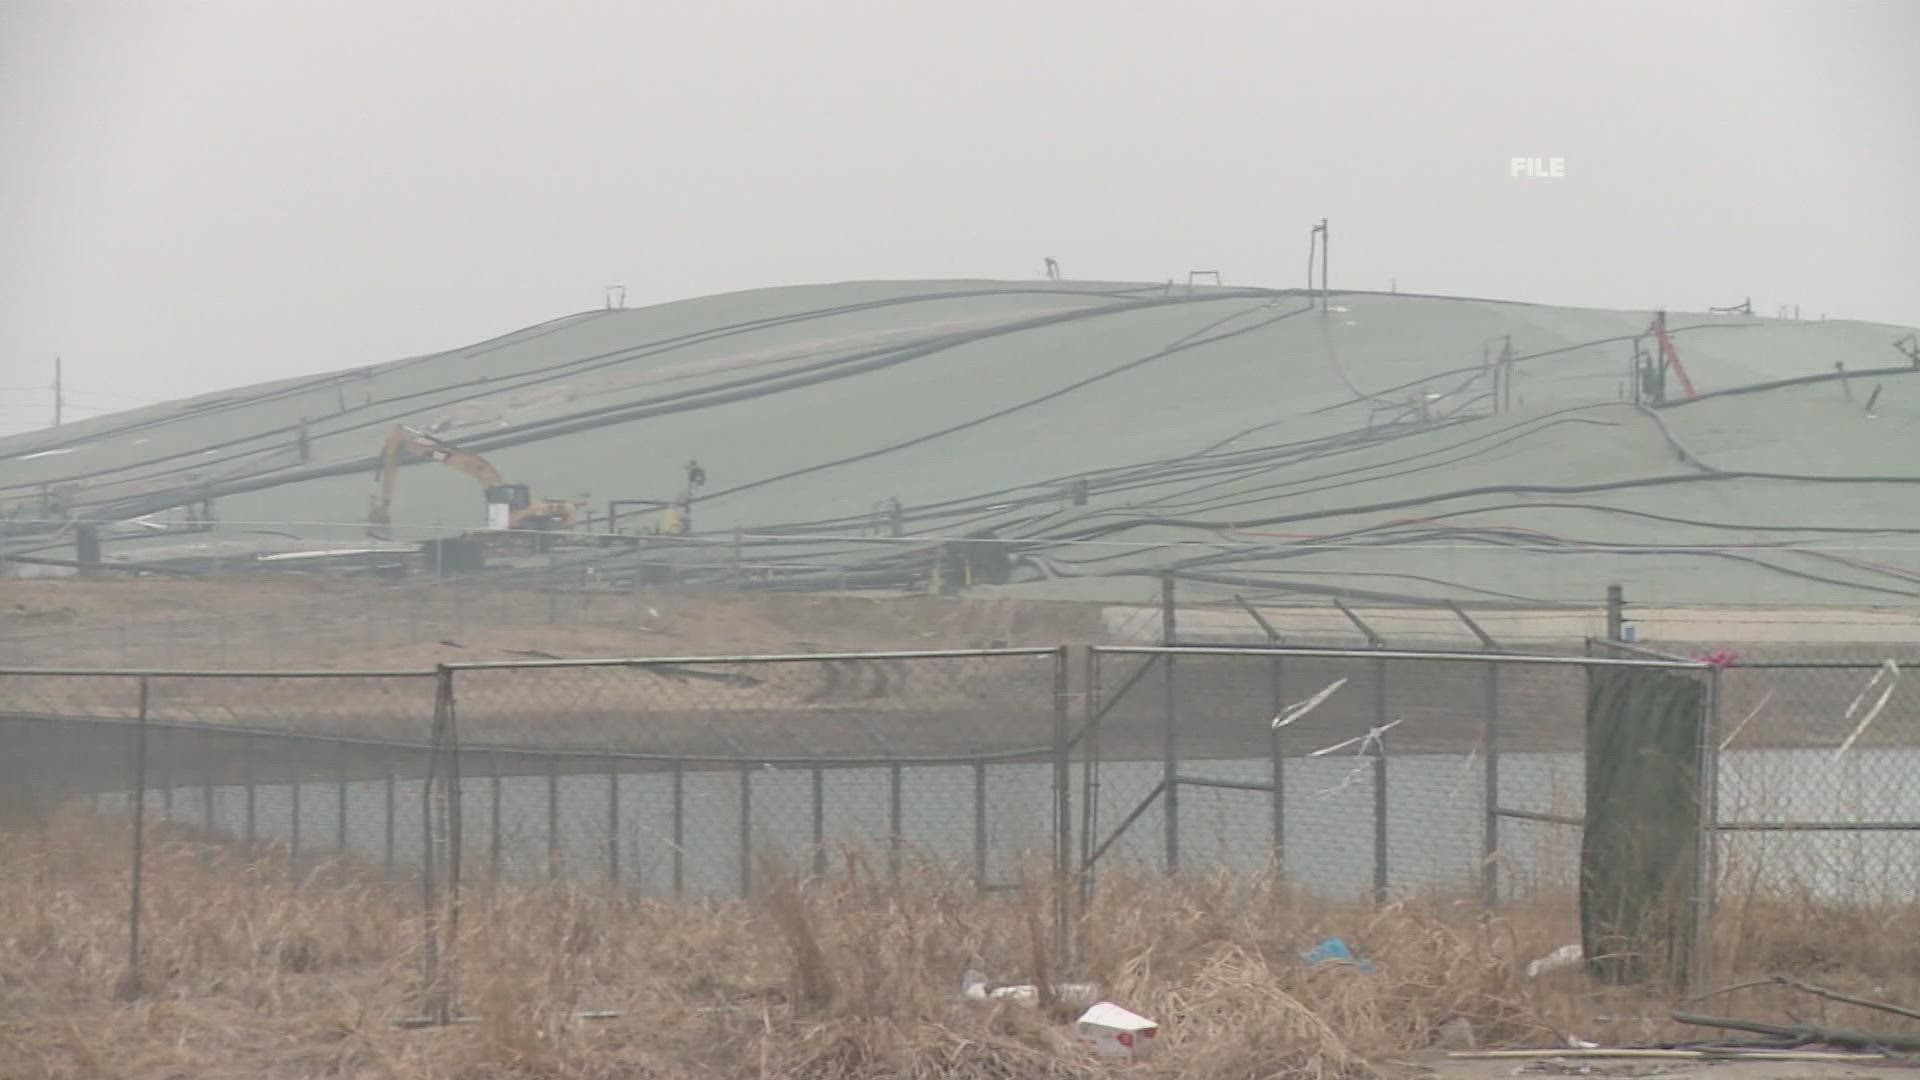 The finding of the yearslong investigation by the Missouri Department of Health and Senior Services was validation for people who live near the landfill.